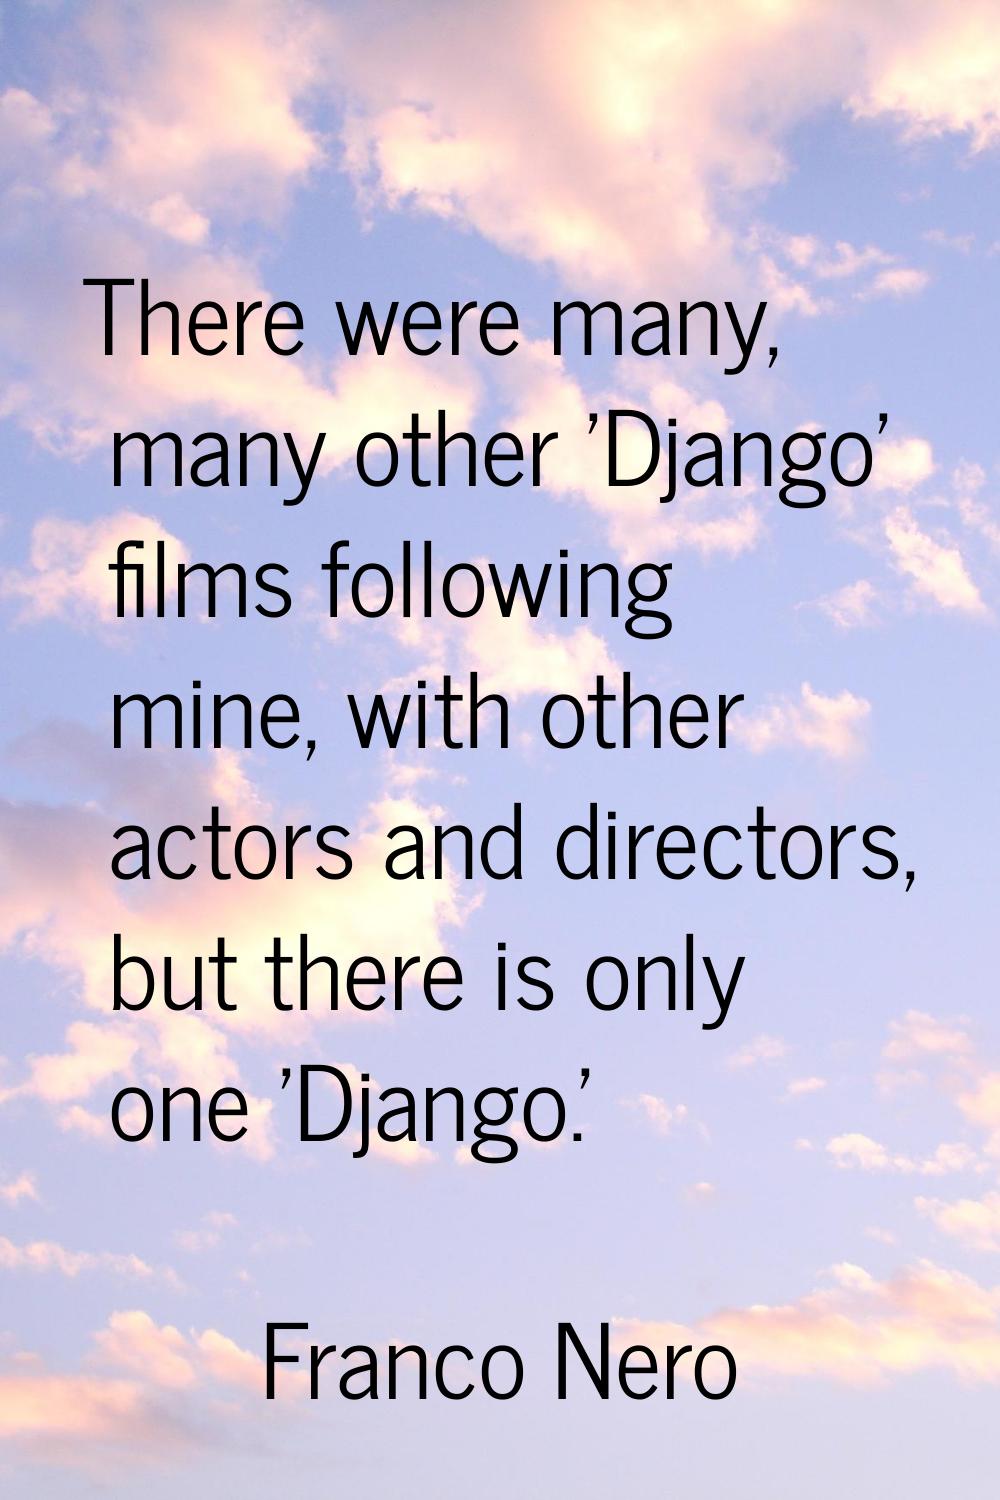 There were many, many other 'Django' films following mine, with other actors and directors, but the